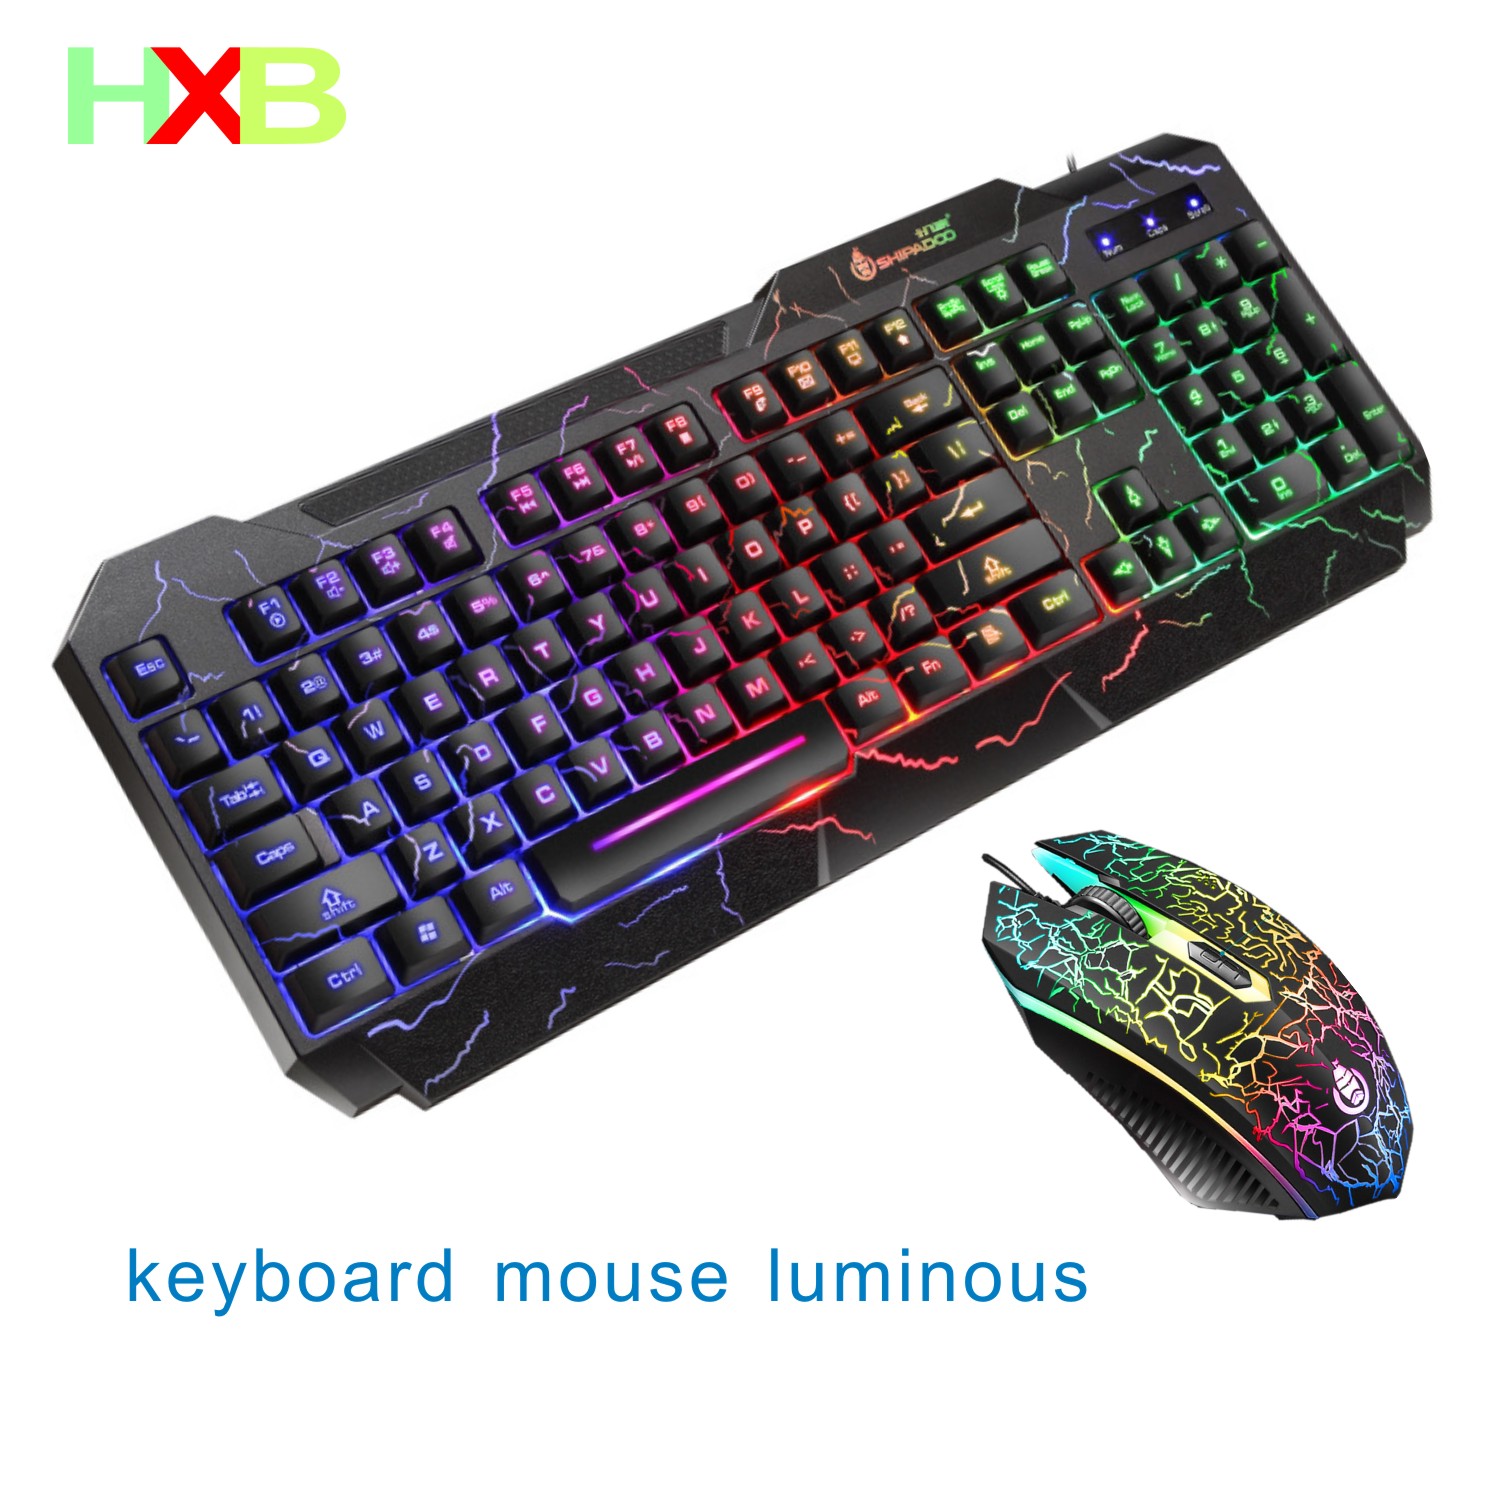 Buy Online Keyboard And Mouse Combo Usb Wired Gamer Gaming Keyboard Mouse Kit Rgb Led Luminous Waterproof Magic Mouse Keyboard Set For Pc Alitools